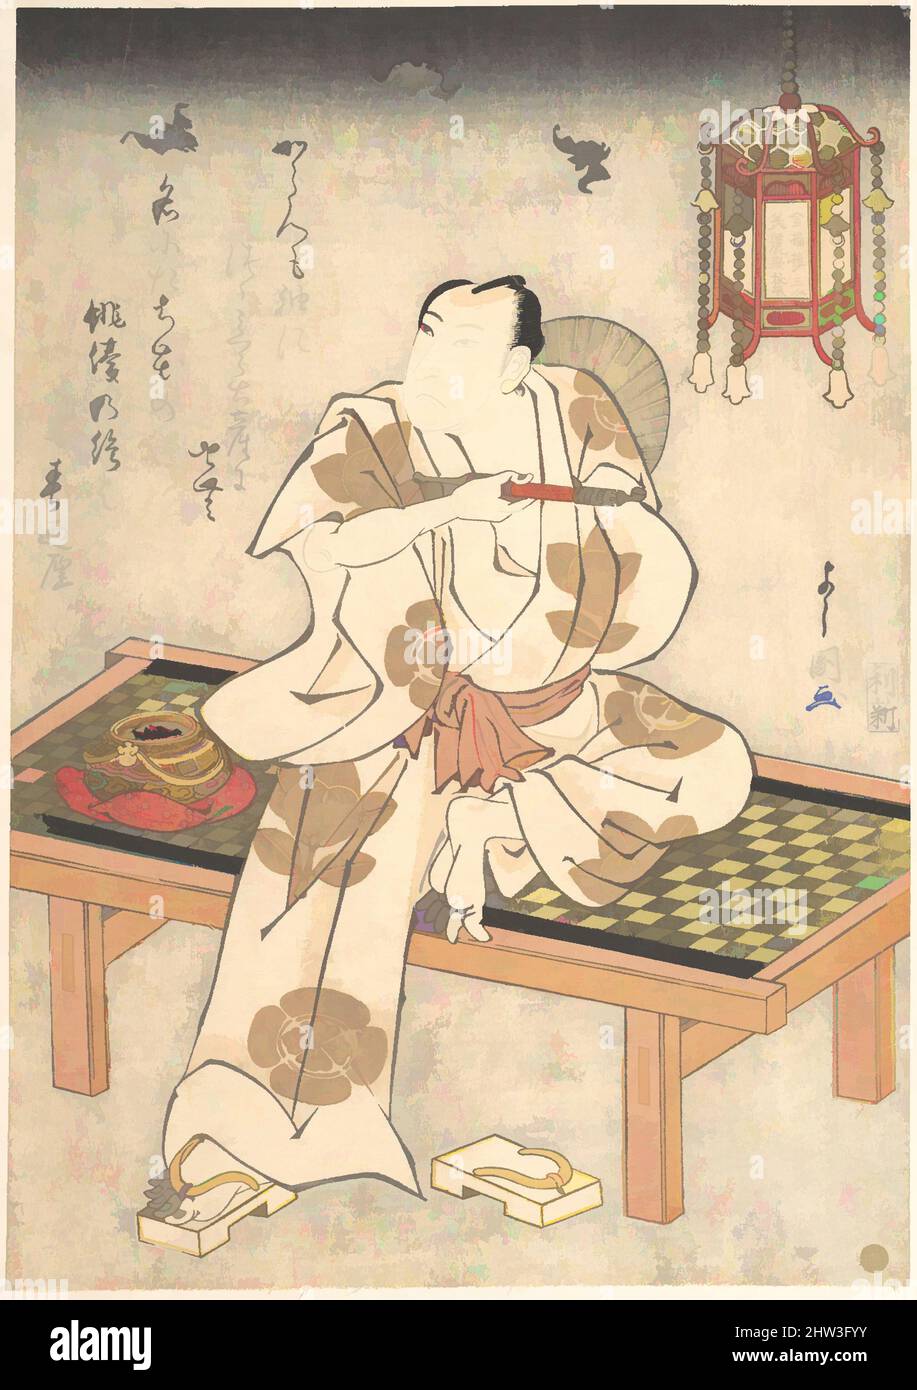 Art inspired by An Actor of the Ichimura Line Sitting on a Shogi (Wooden Bench) and Holding a Pipe, Edo period (1615–1868), Japan, Polychrome woodblock print; ink and color on paper, H. 14 5/8 in. (37.1 cm); W. 10 1/4 in. (26 cm), Prints, Ippyotei Yoshikuni (Japanese, active mid-19th, Classic works modernized by Artotop with a splash of modernity. Shapes, color and value, eye-catching visual impact on art. Emotions through freedom of artworks in a contemporary way. A timeless message pursuing a wildly creative new direction. Artists turning to the digital medium and creating the Artotop NFT Stock Photo